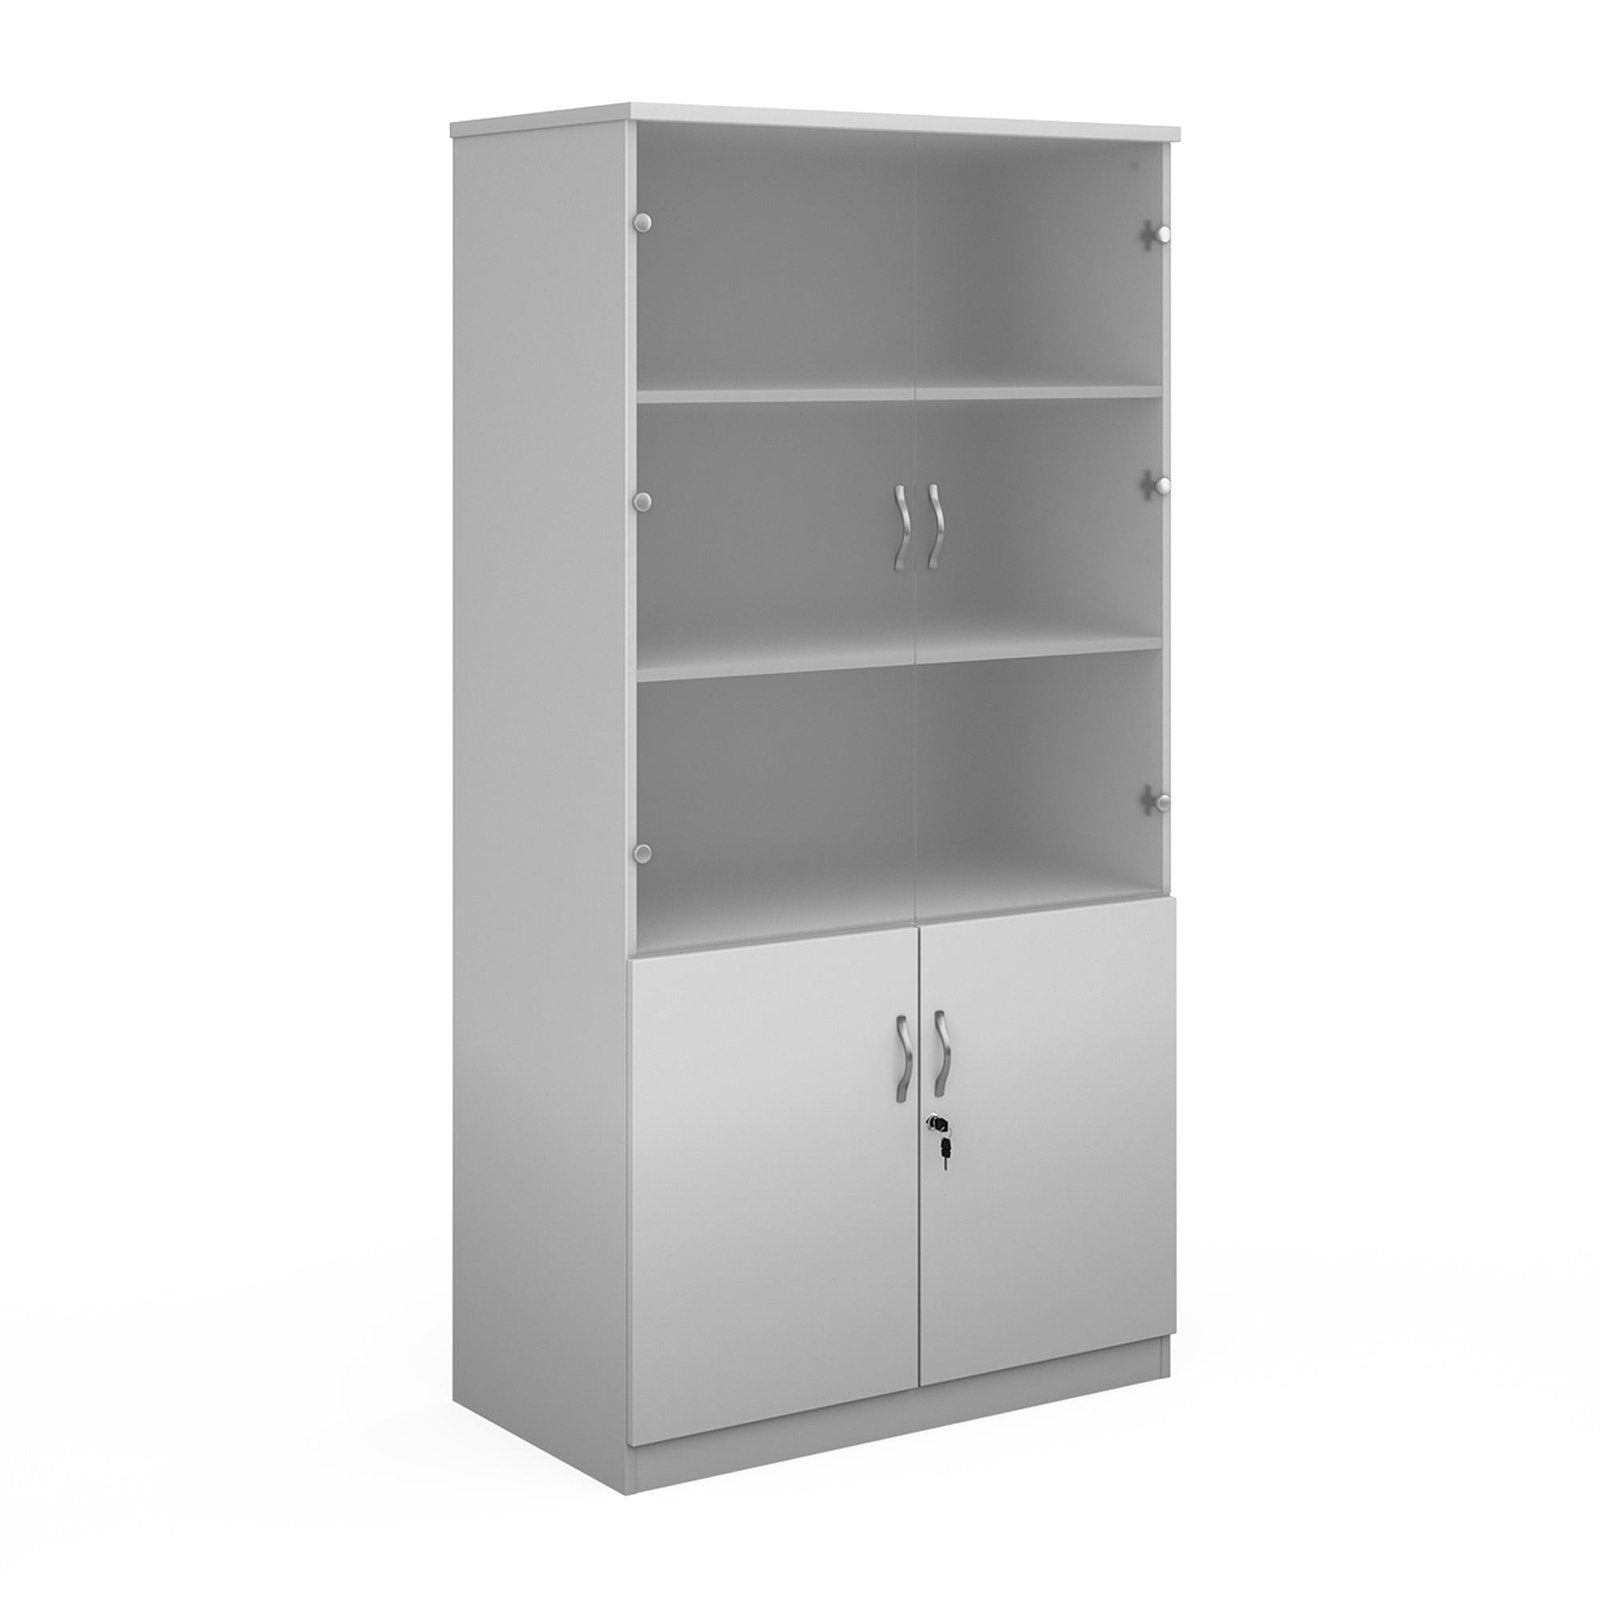 Deluxe combination unit with glass upper doors - Office Products Online